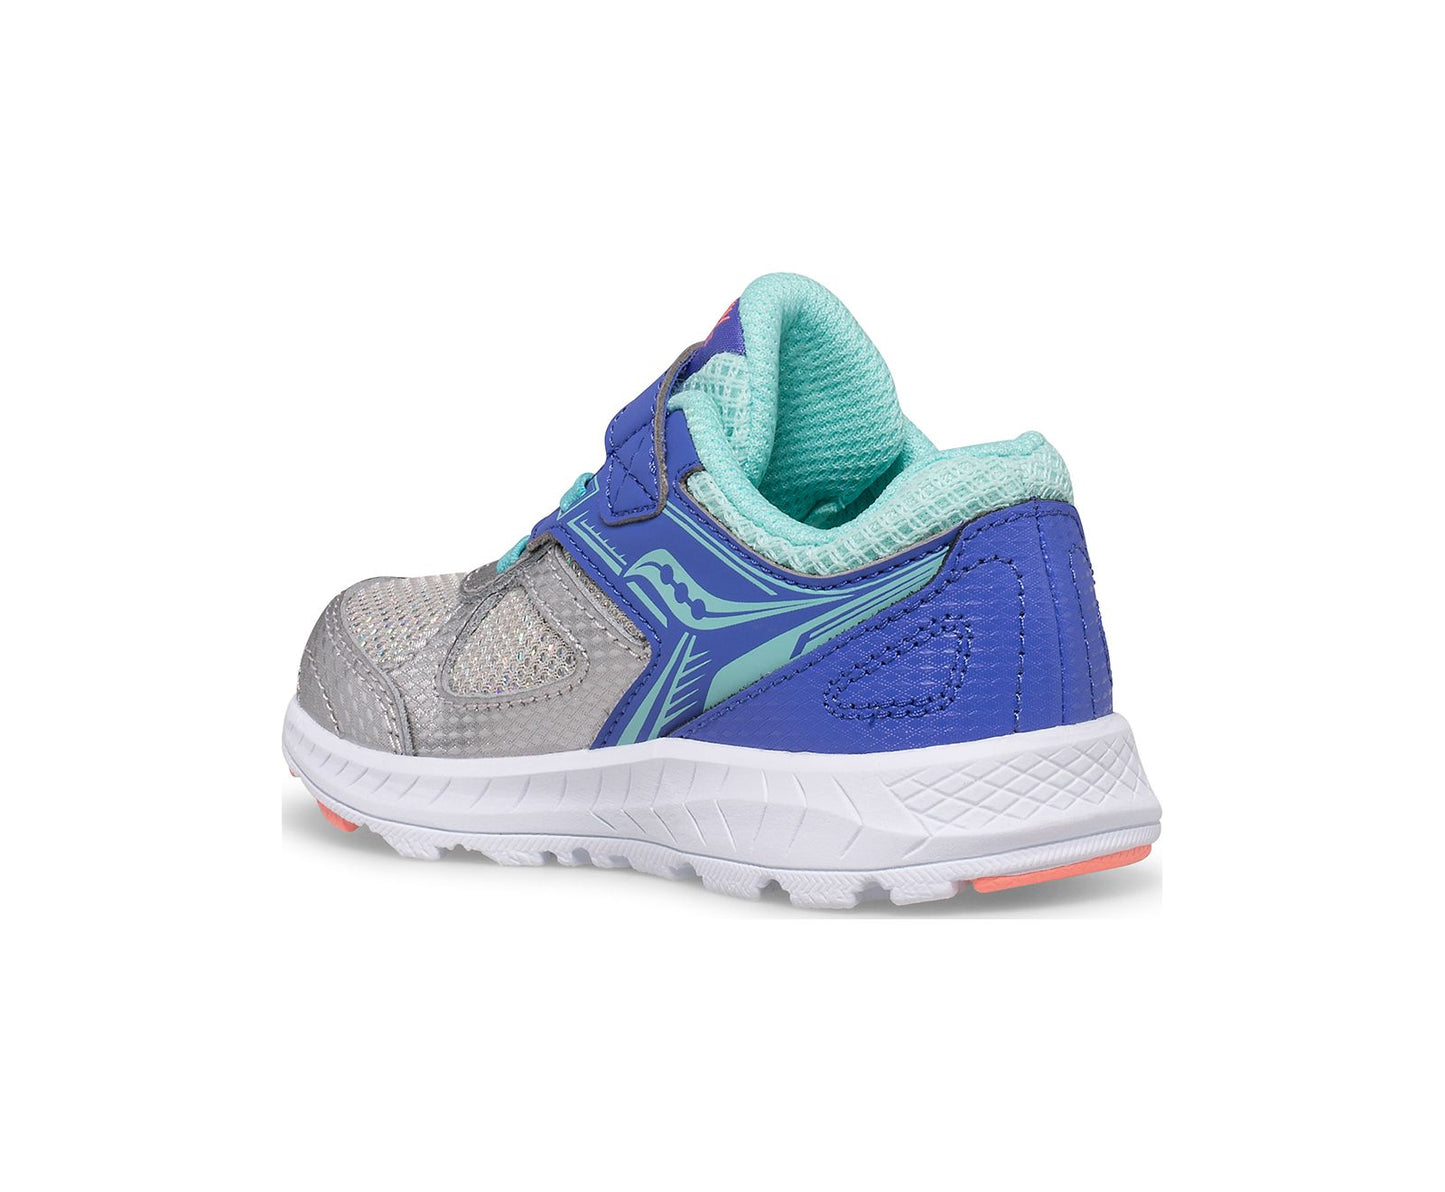 Cohesion 14 A/C Jr. Sneaker Silver/Periwinkle/Turquoise (4c-10c)